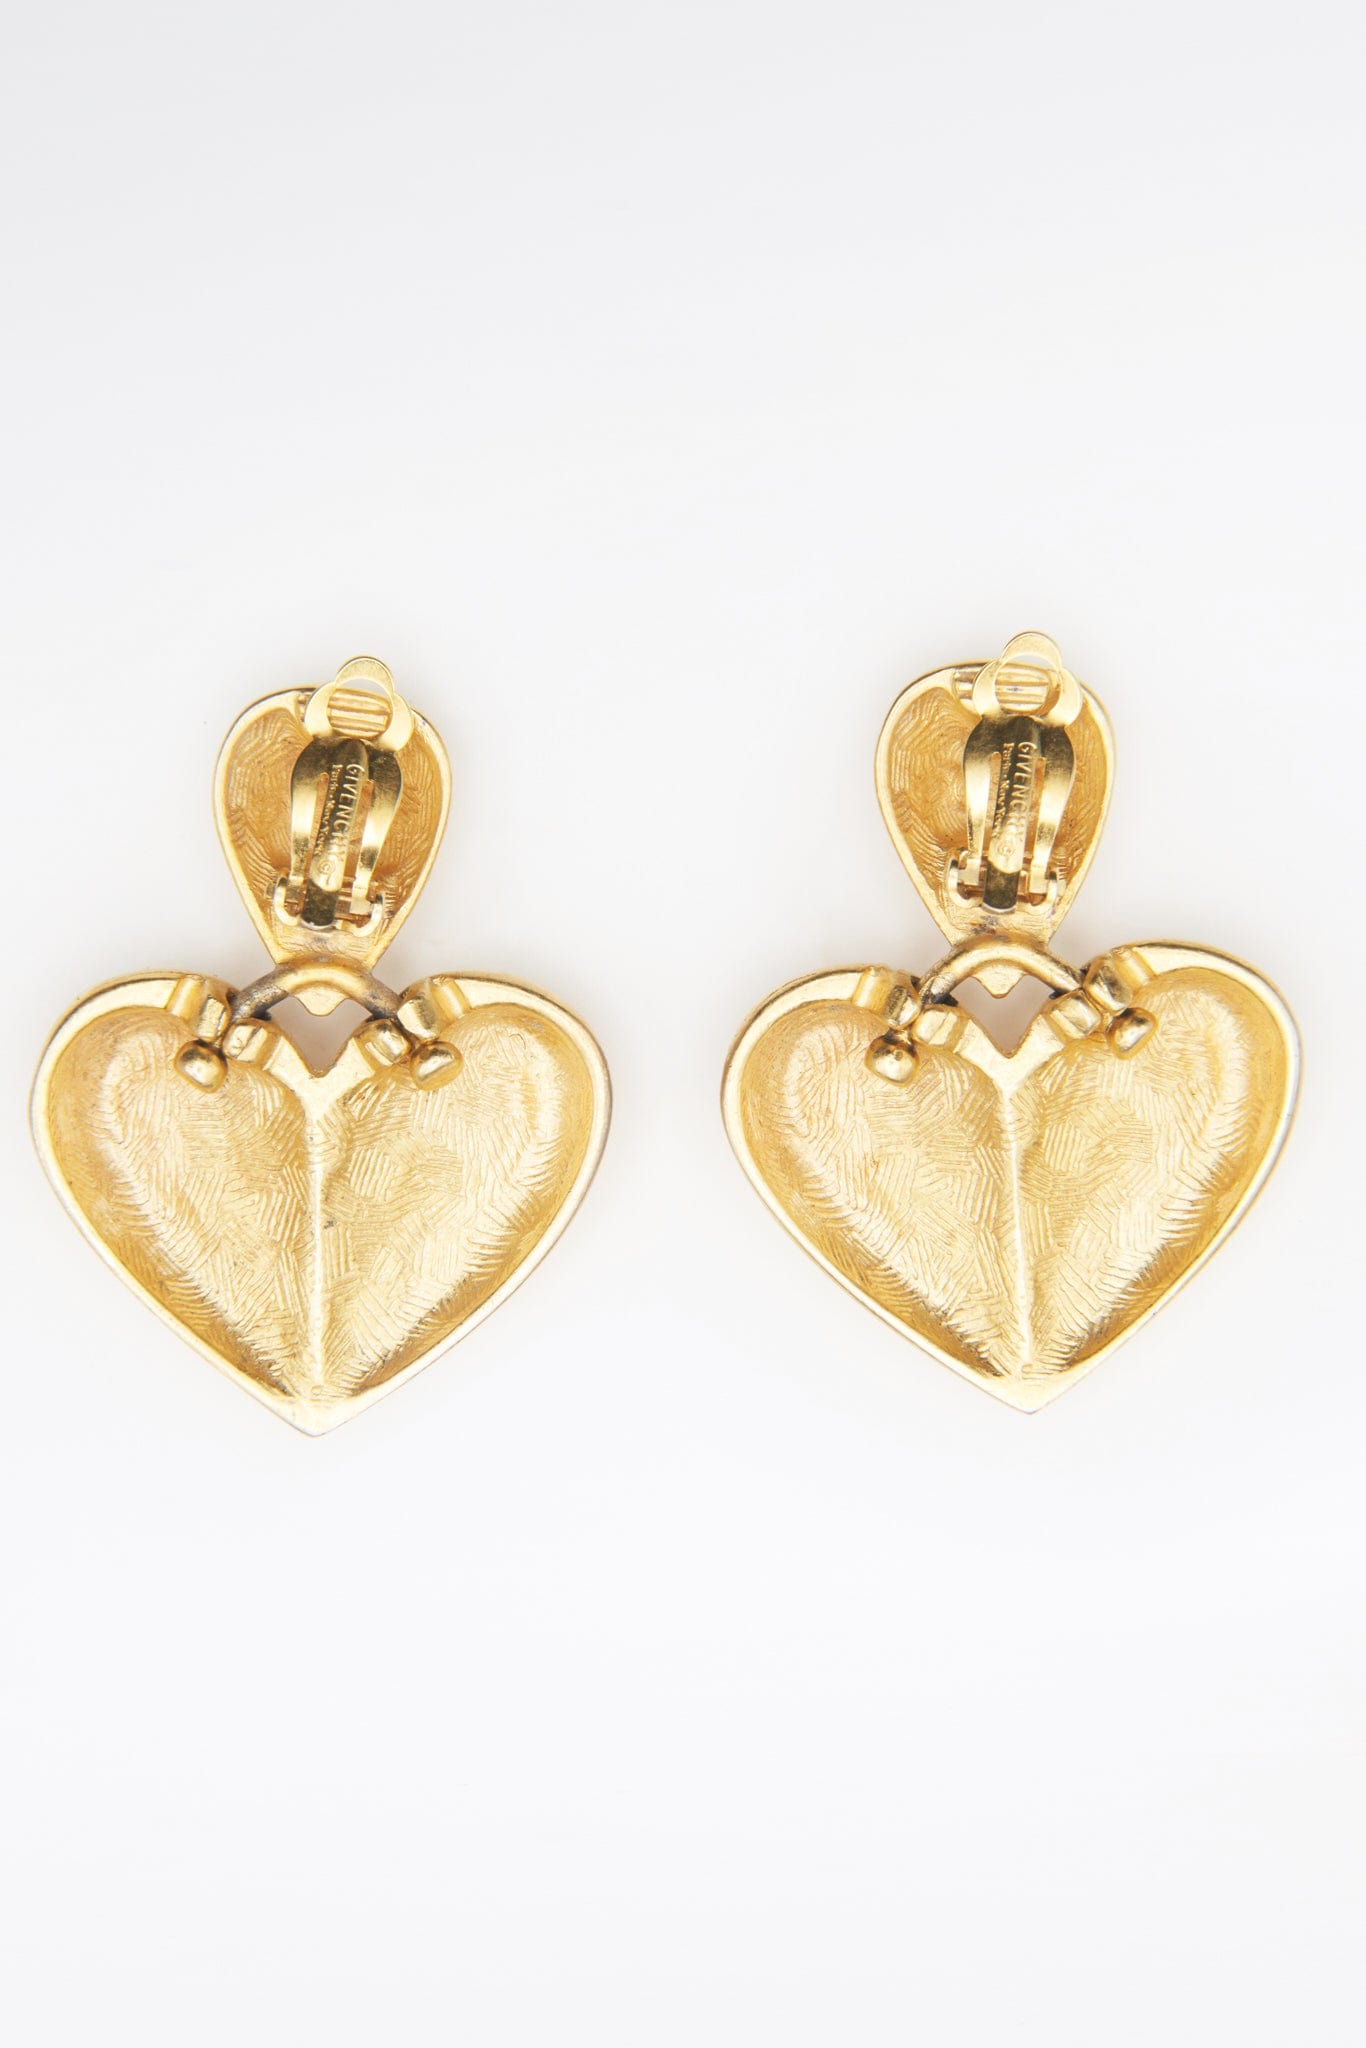 Update 175+ givenchy heart earrings